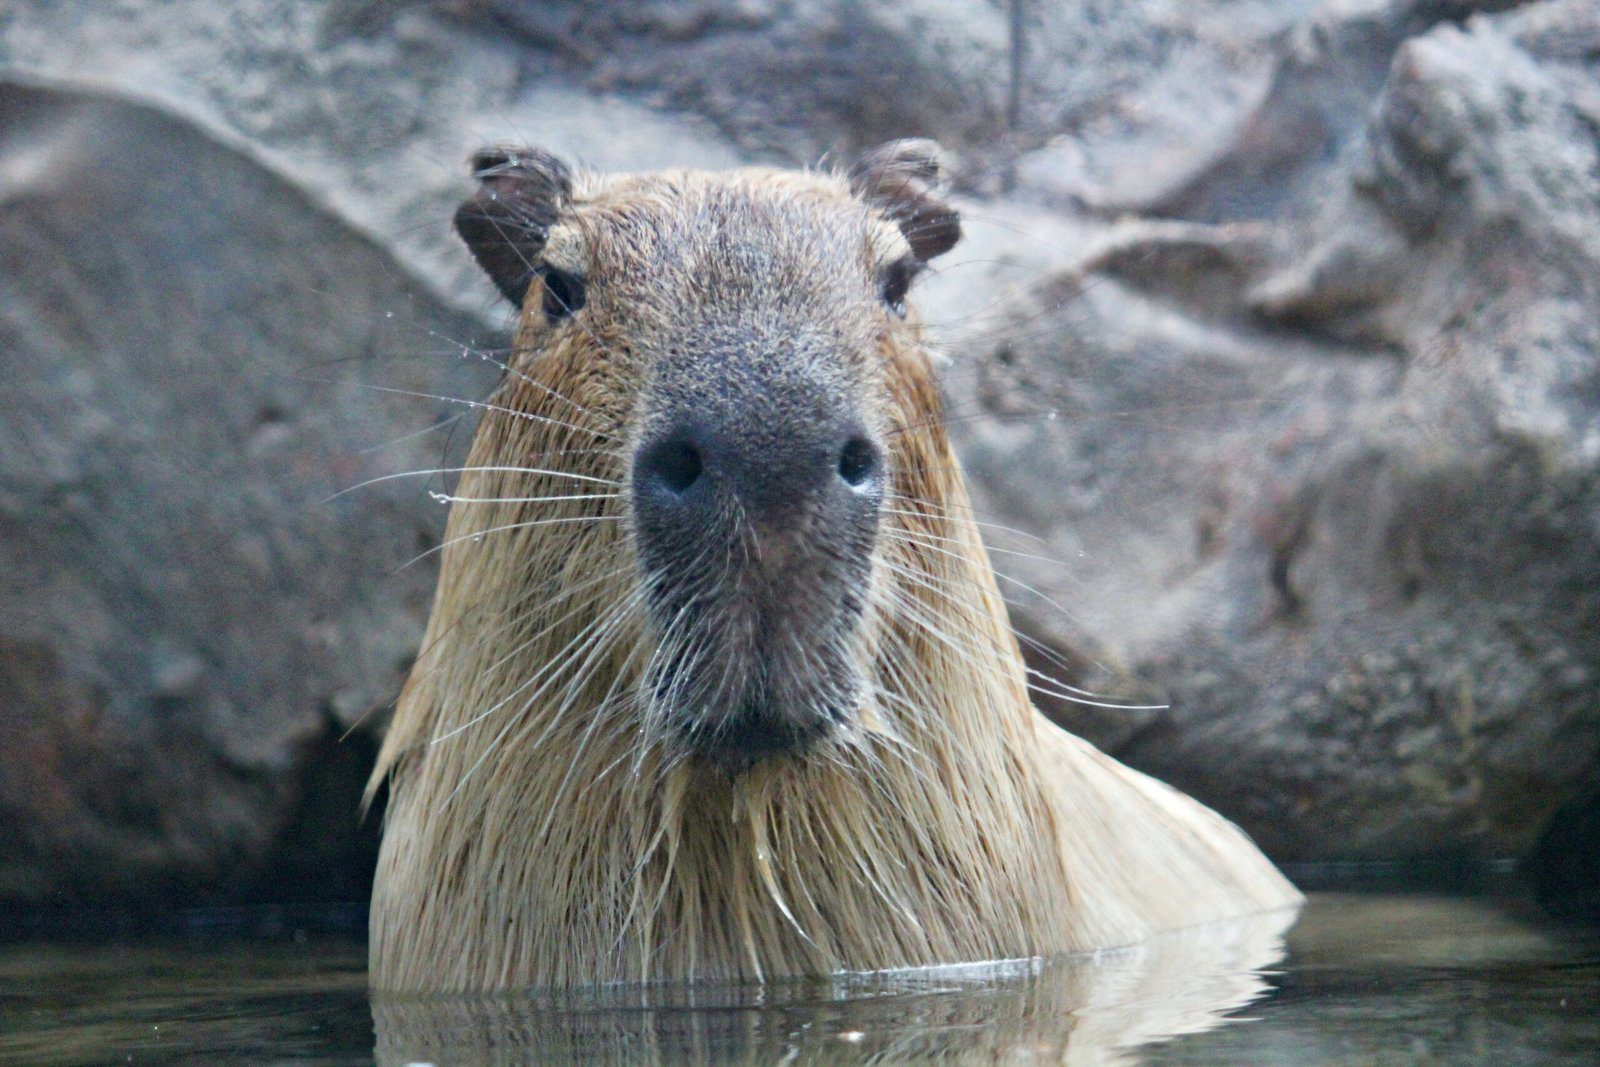 The Capybara: A Fascinating Rodent